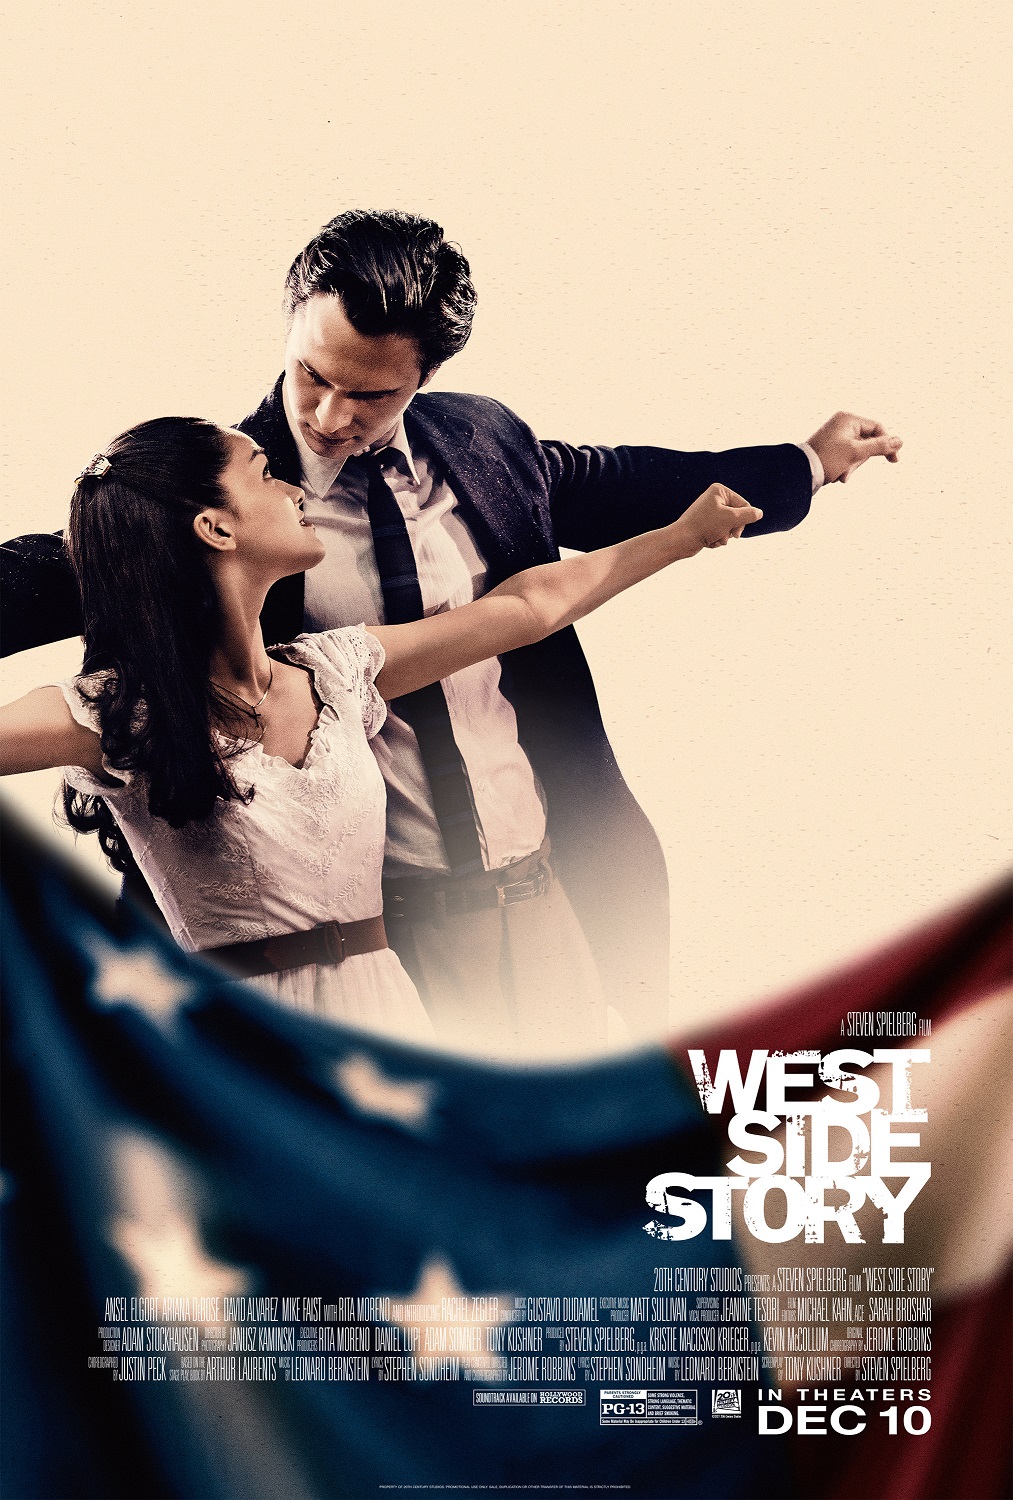 West Side Story movie review